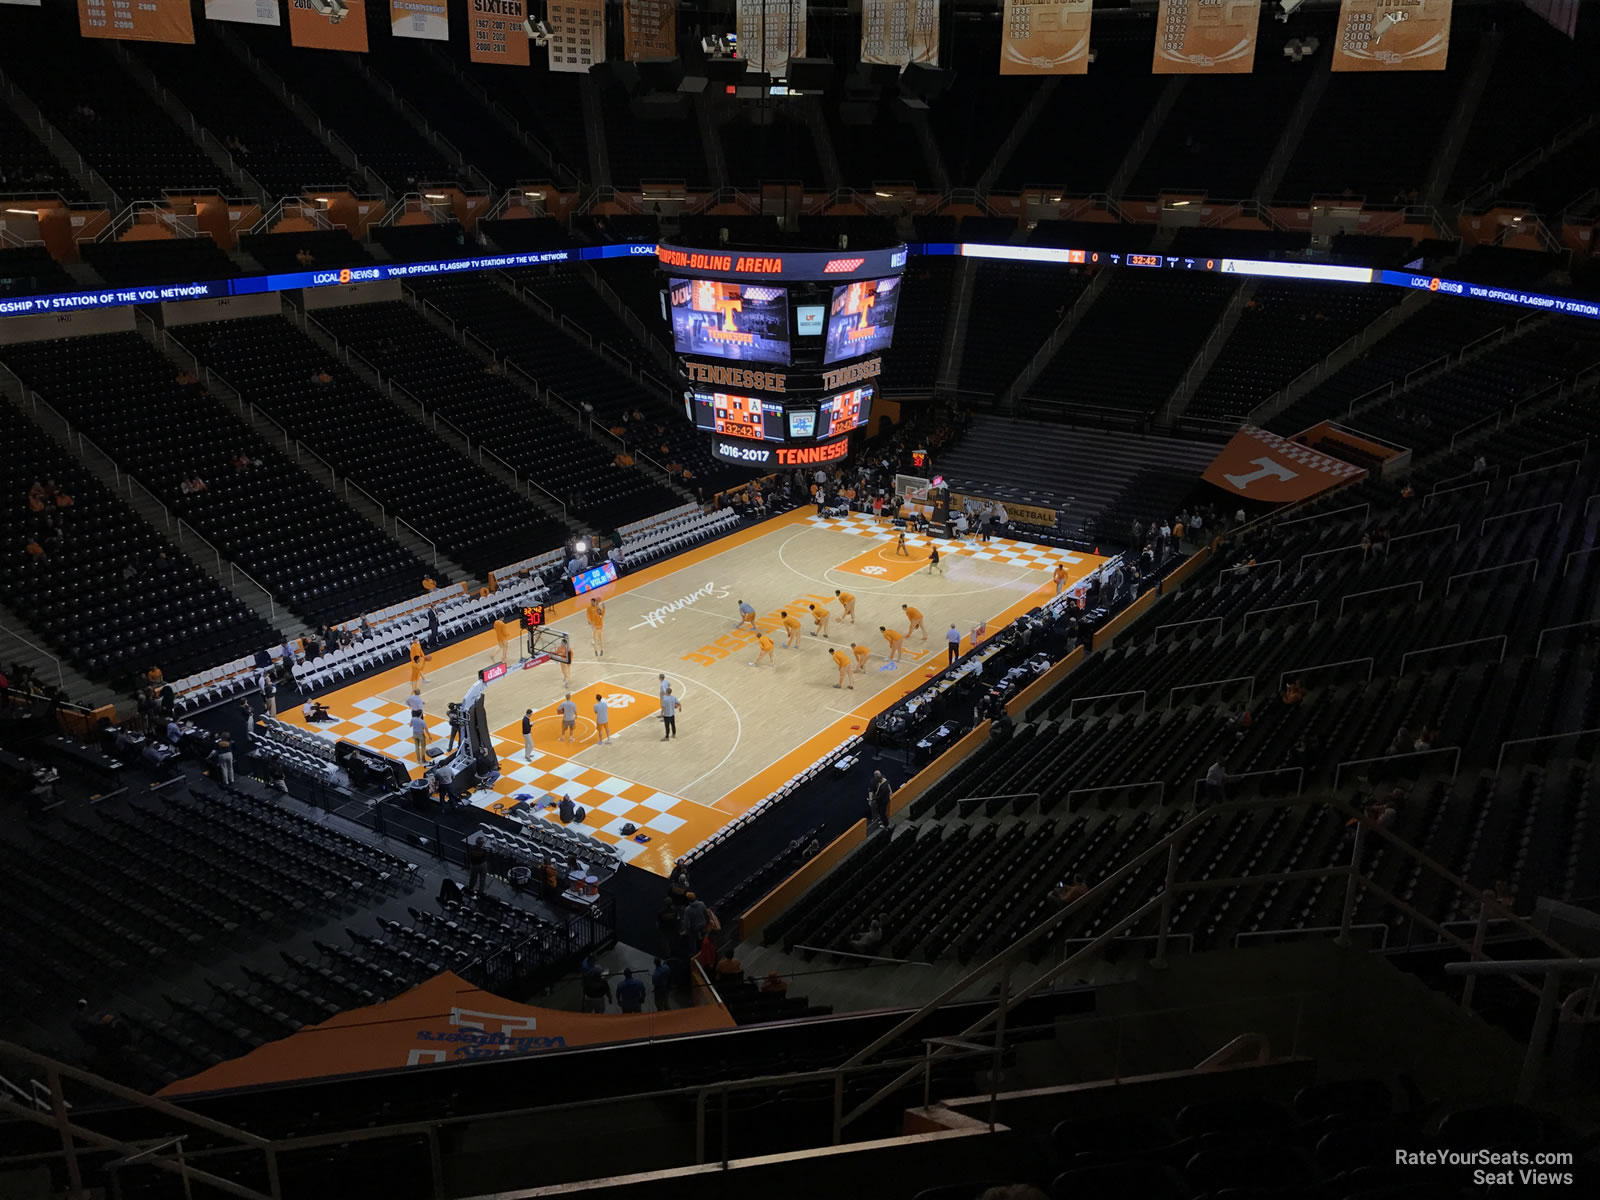 section 310, row 7 seat view  - thompson-boling arena